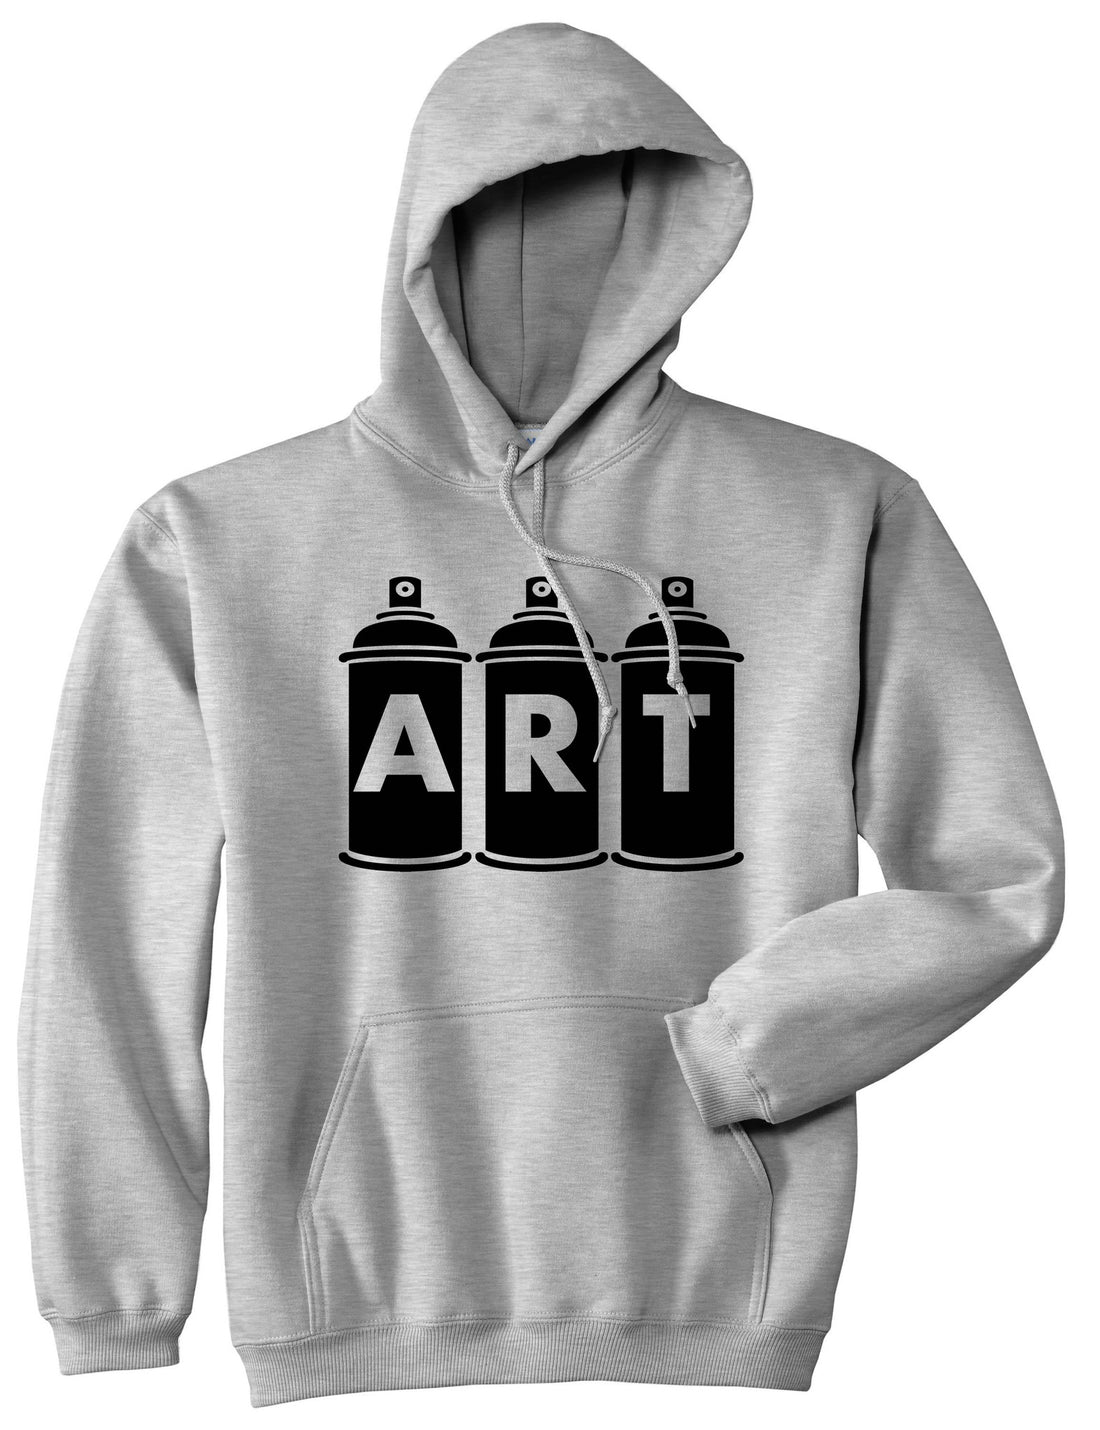 Art graf graffiti spray can paint artist Pullover Hoodie in Grey By Kings Of NY